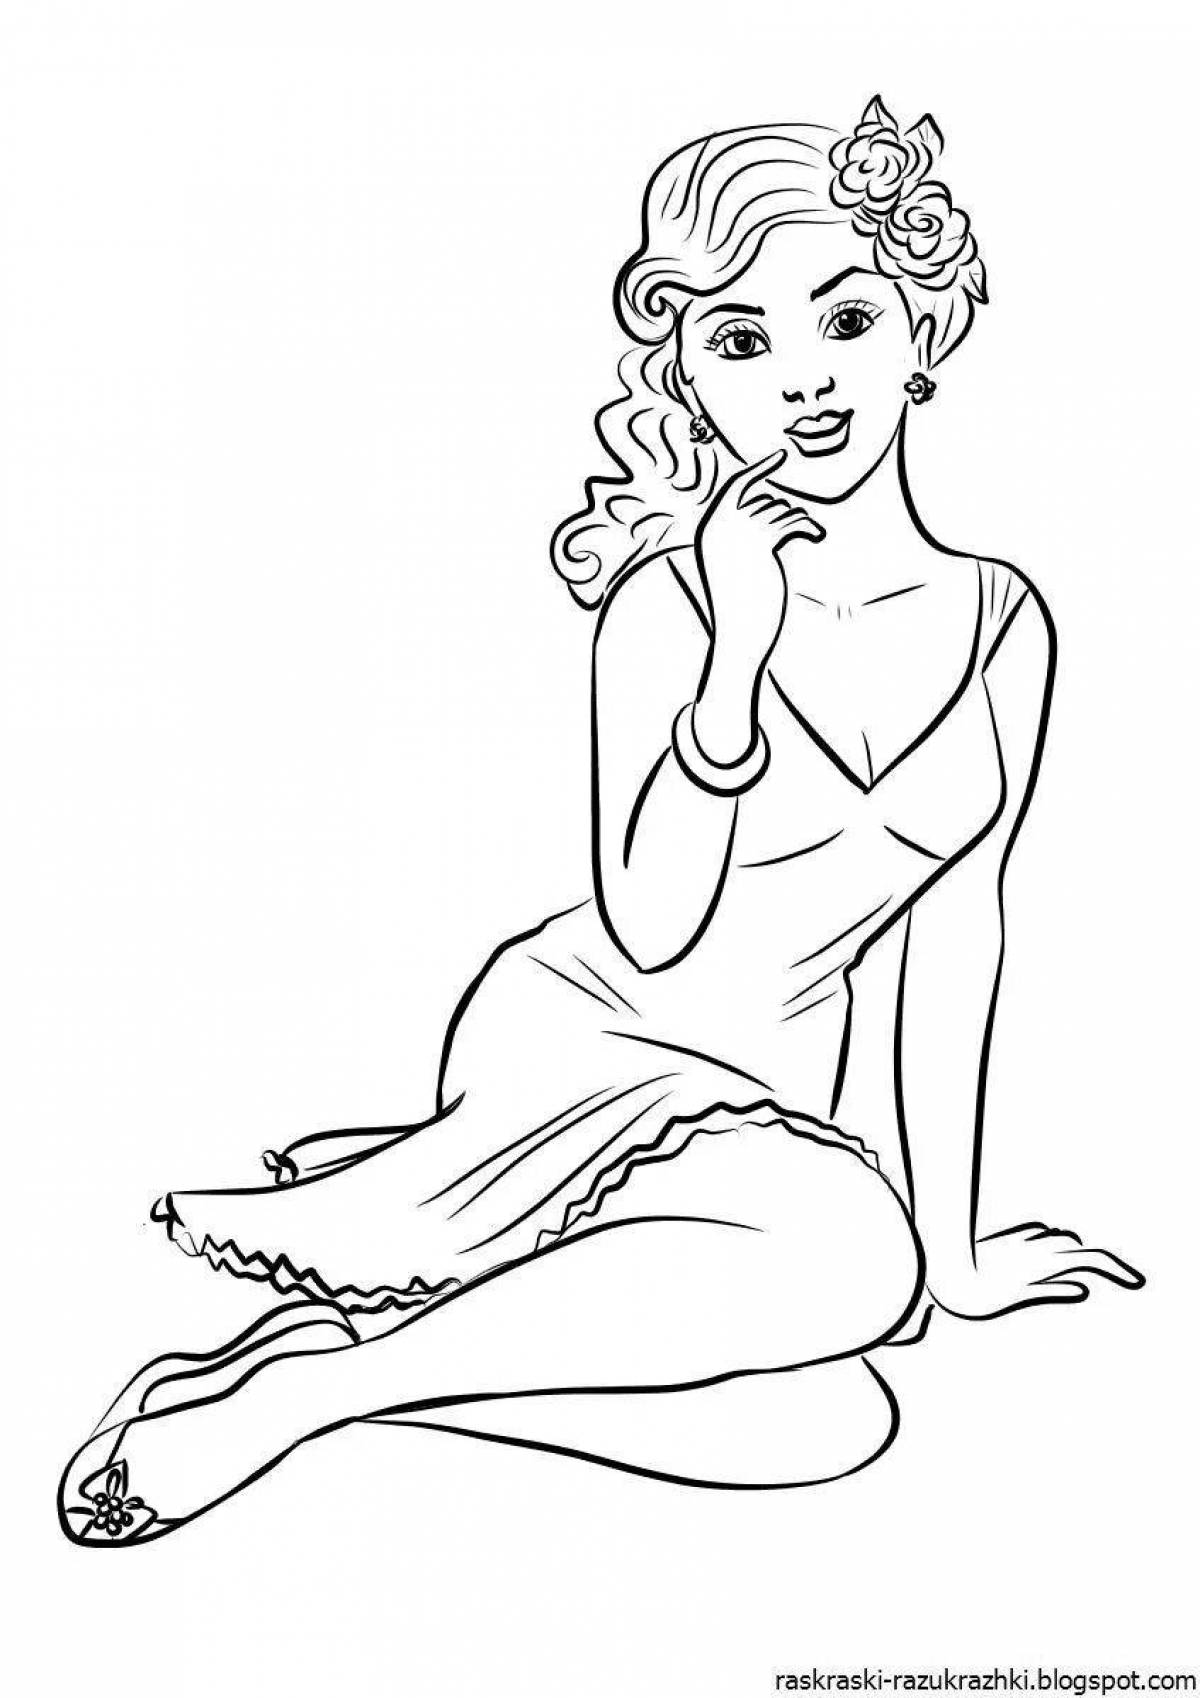 Lady shining coloring book